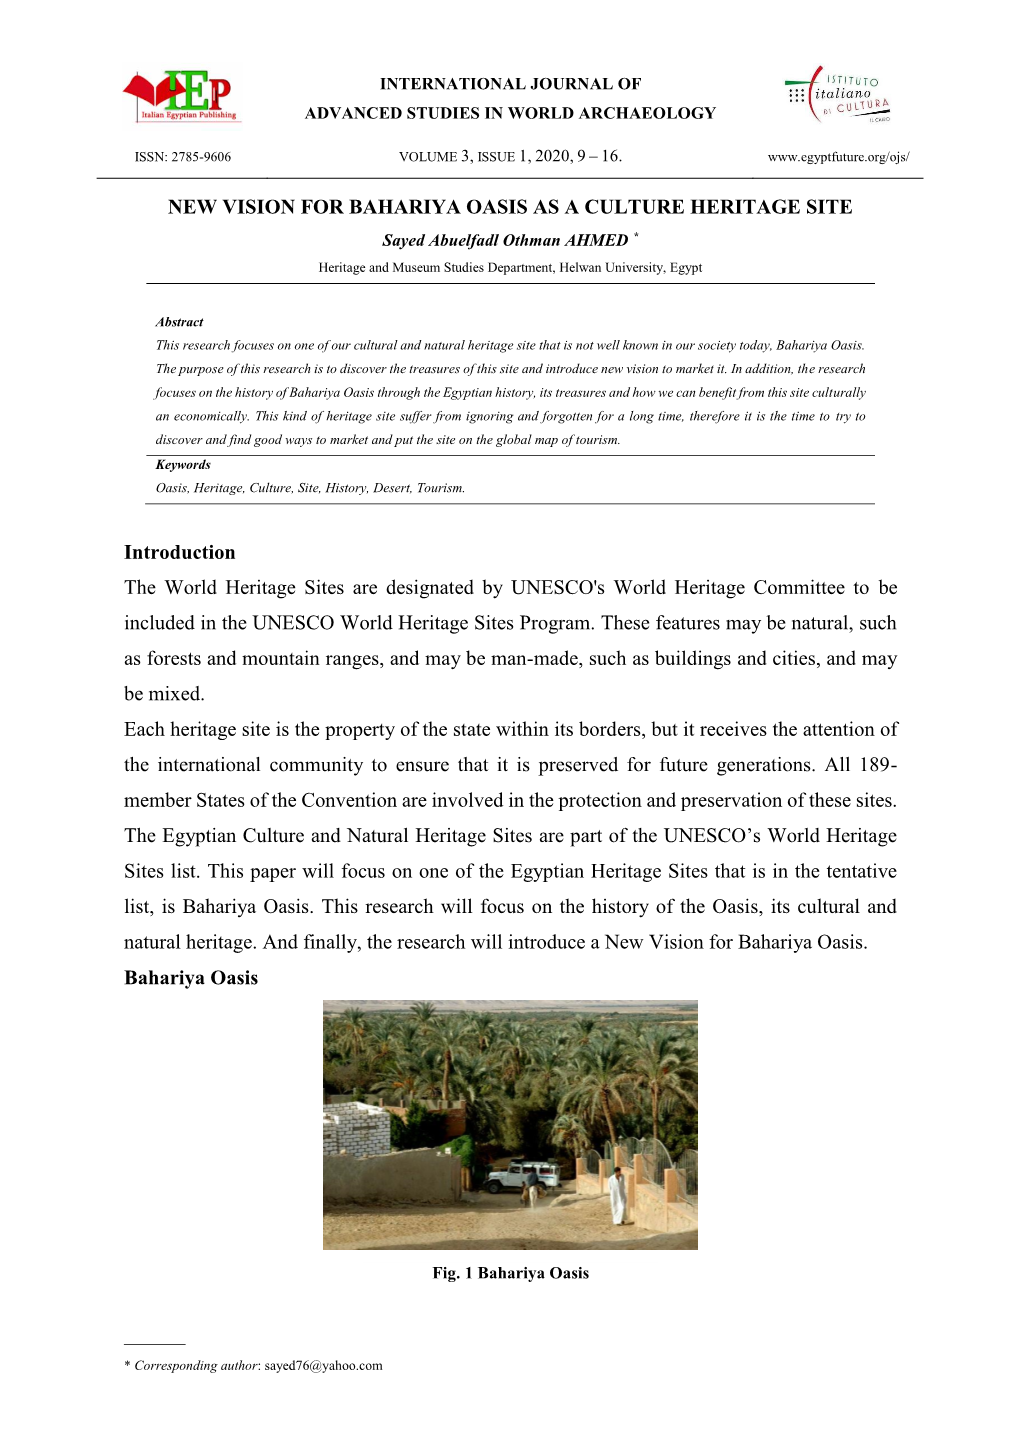 NEW VISION for BAHARIYA OASIS AS a CULTURE HERITAGE SITE Sayed Abuelfadl Othman AHMED * Heritage and Museum Studies Department, Helwan University, Egypt